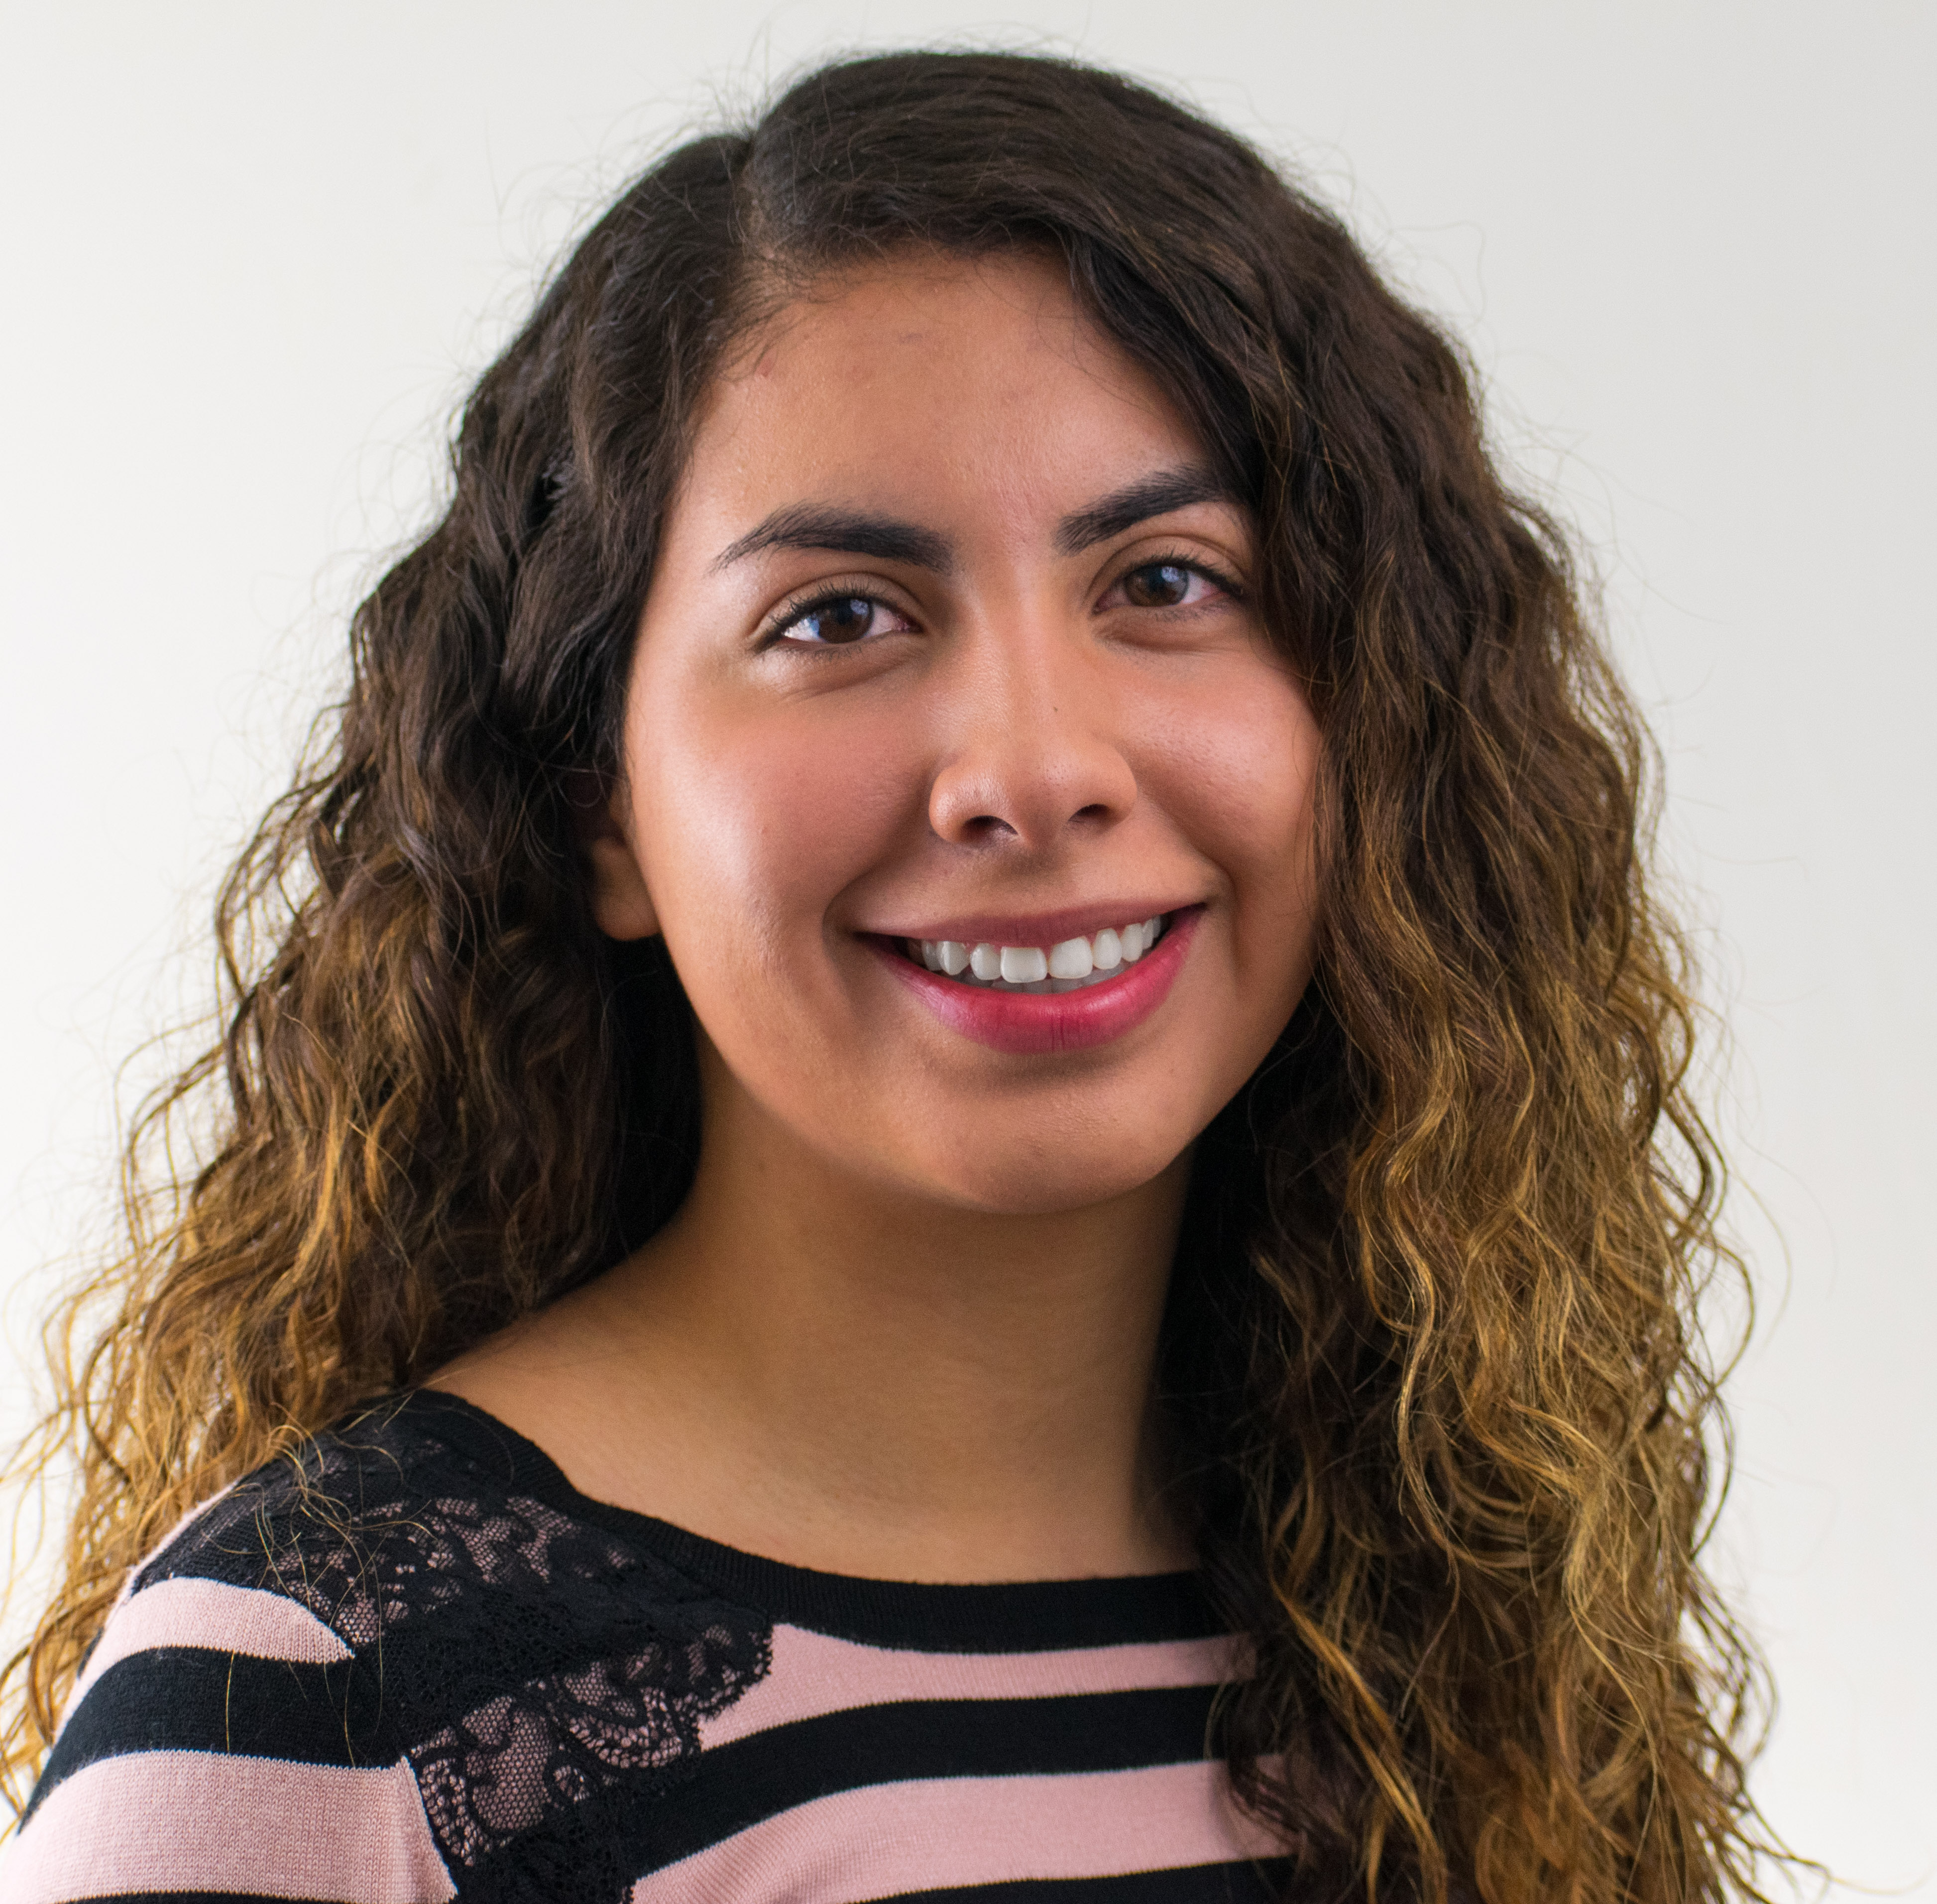 EDGE recently awarded its inaugural student-of-the-year honor to Aryana Carreras